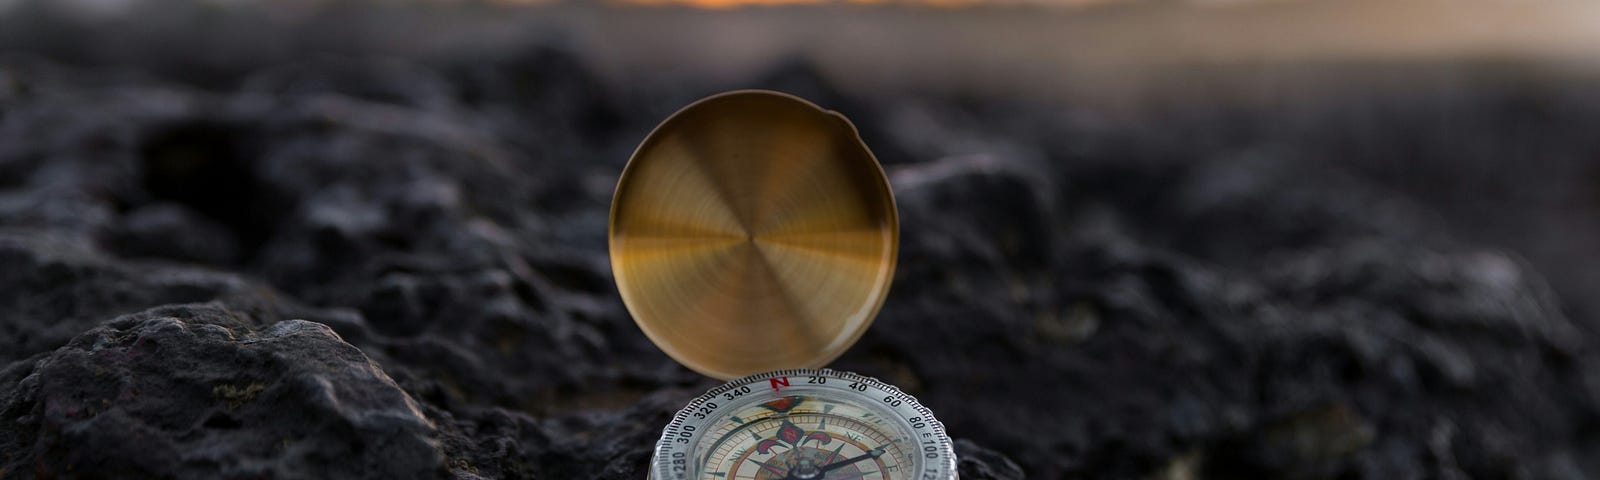 Golden compass on the black stones showing the direction.